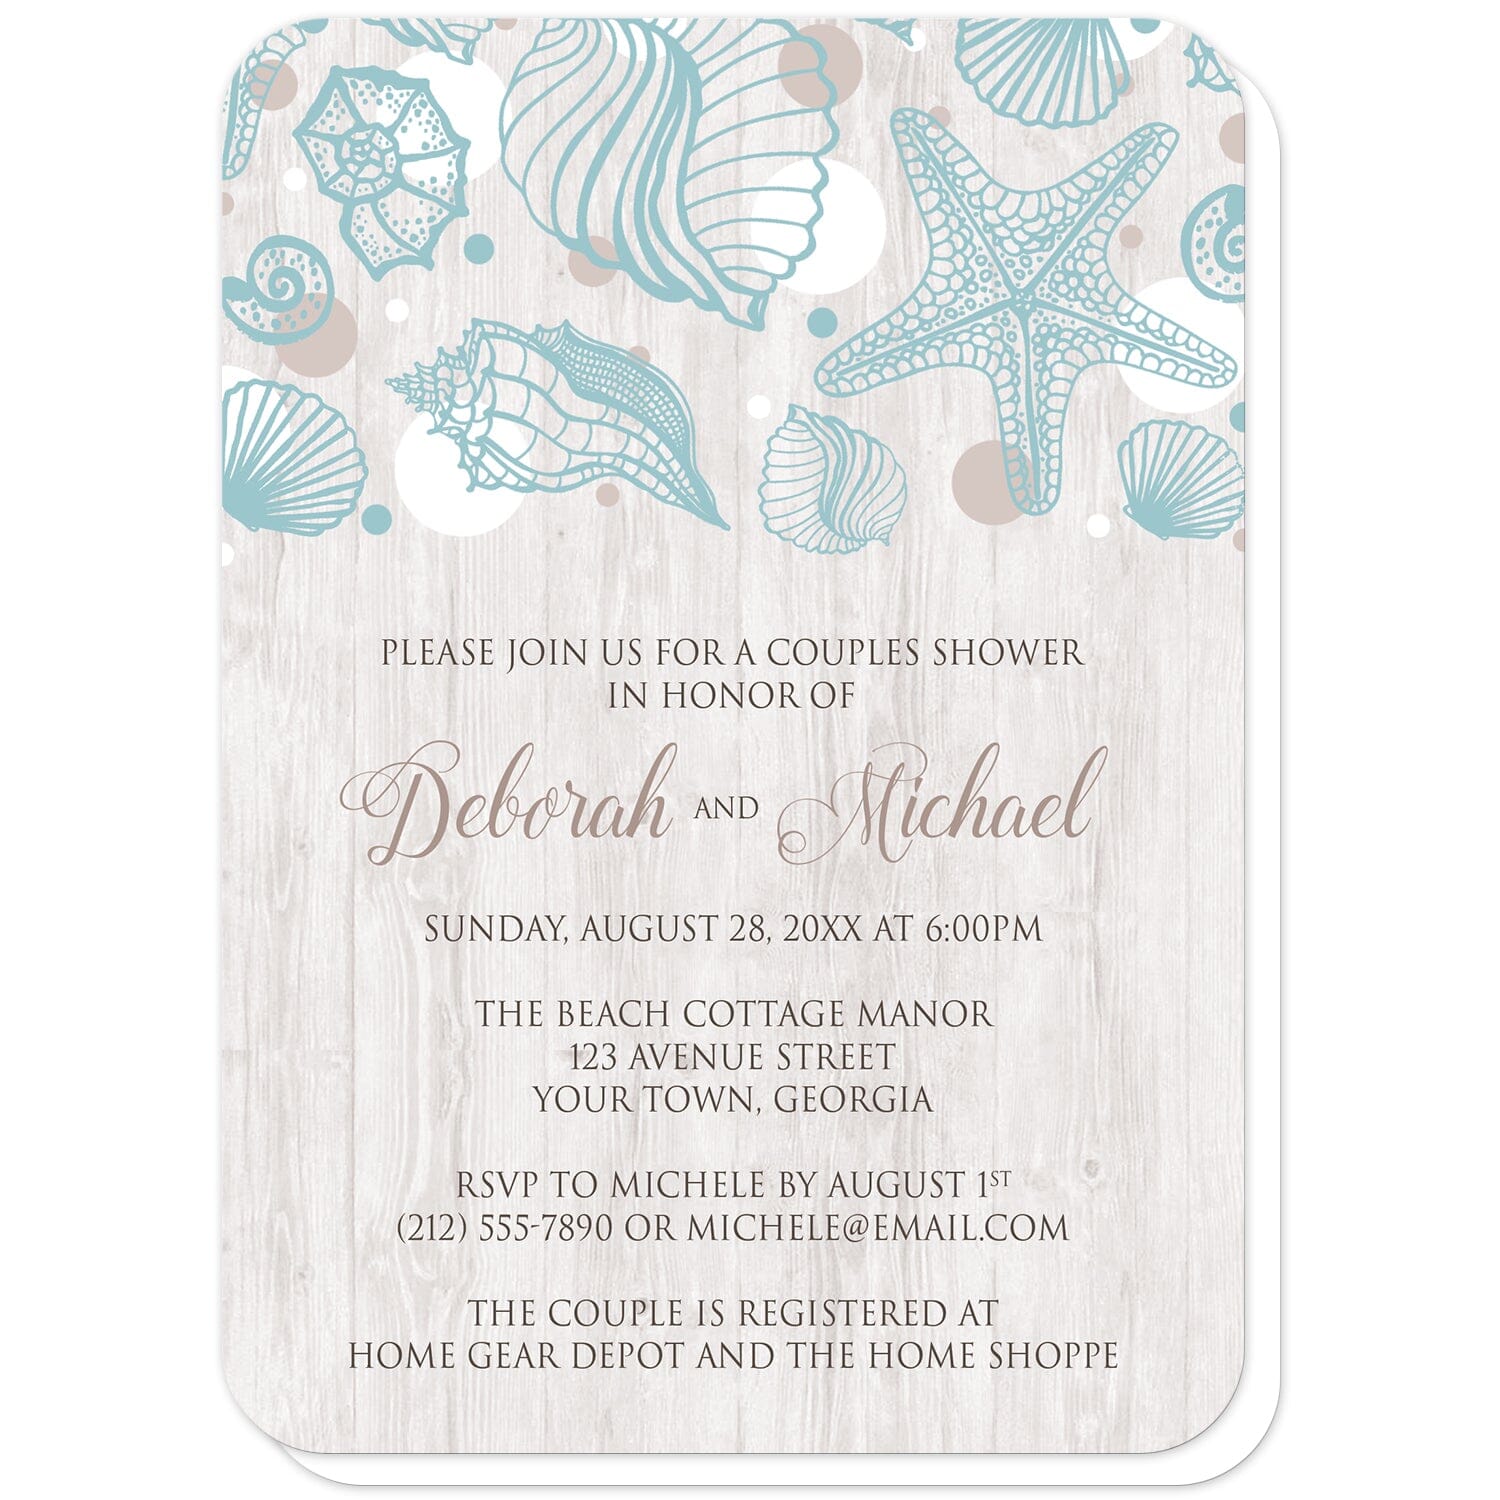 Seashell Whitewashed Wood Beach Couples Shower Invitations (with rounded corners) at Artistically Invited. Rustic-chic seashell whitewashed wood beach couples shower invitations with a turquoise seashell line drawing with accent tan and white dots over a light whitewashed wood illustration. Your personalized couples shower celebration details are custom printed in tan and brown over the whitewashed wood background below the seashells.